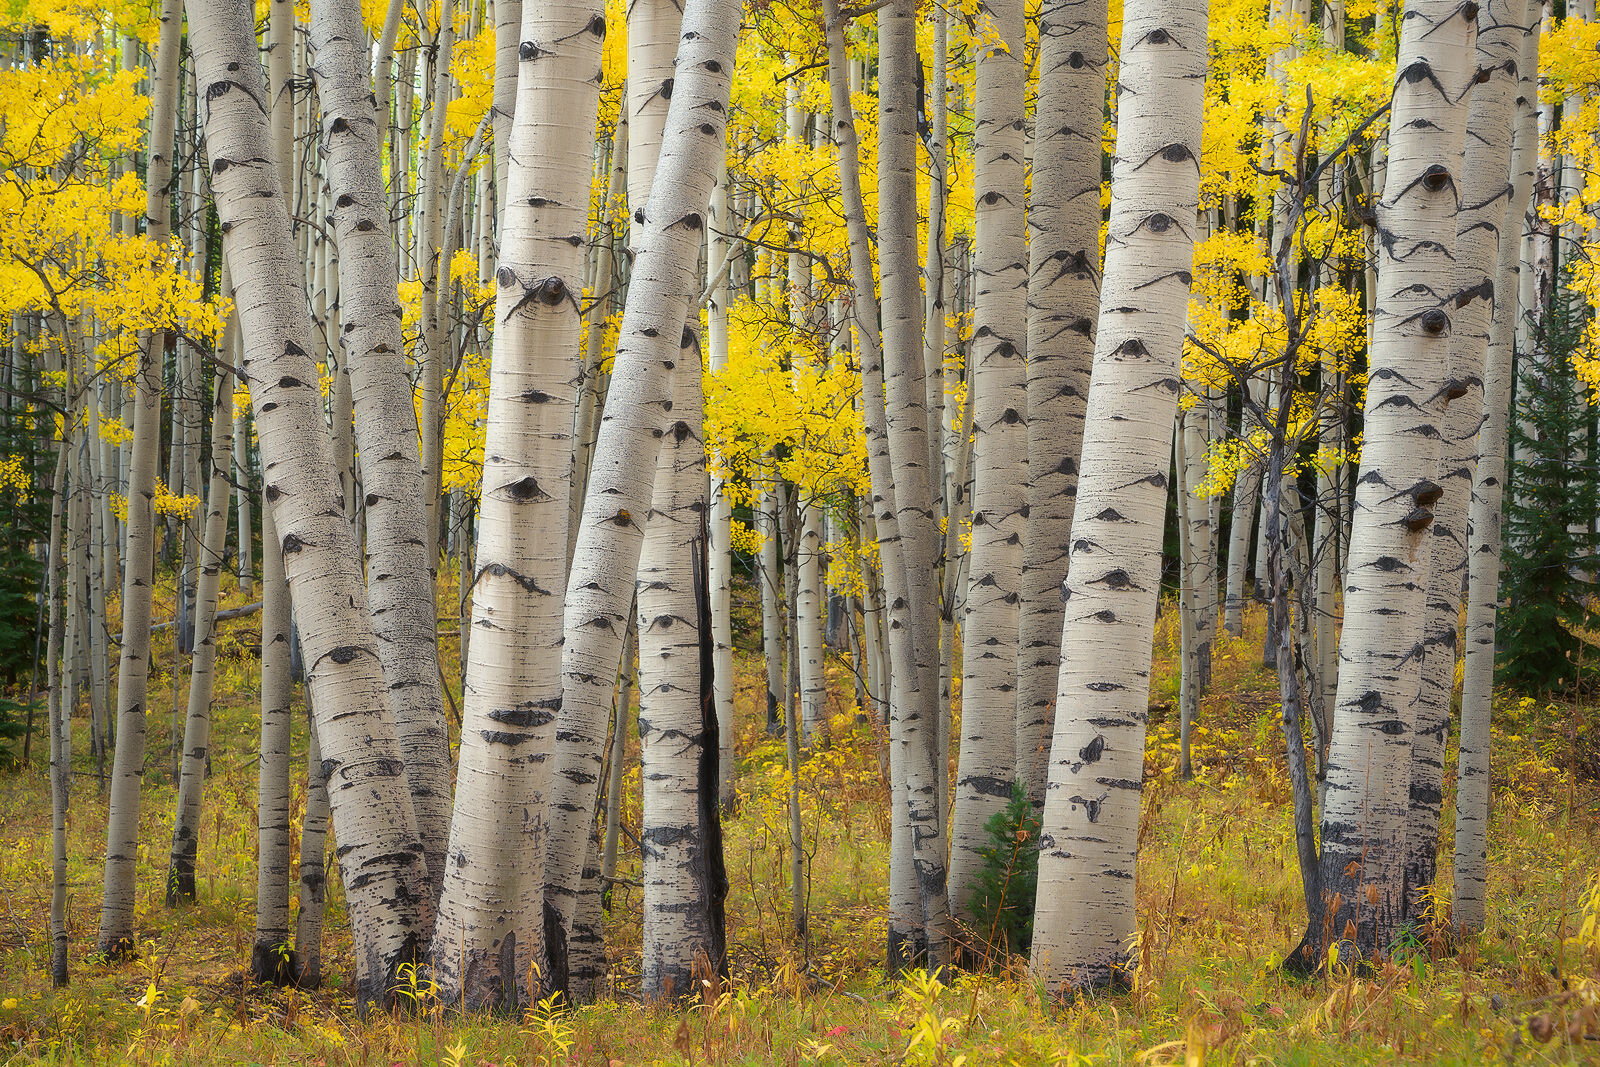 Aspen tree trunks grow up out of the yellow grass and bright yellow leaves hang off the branches lighting up the scene. 